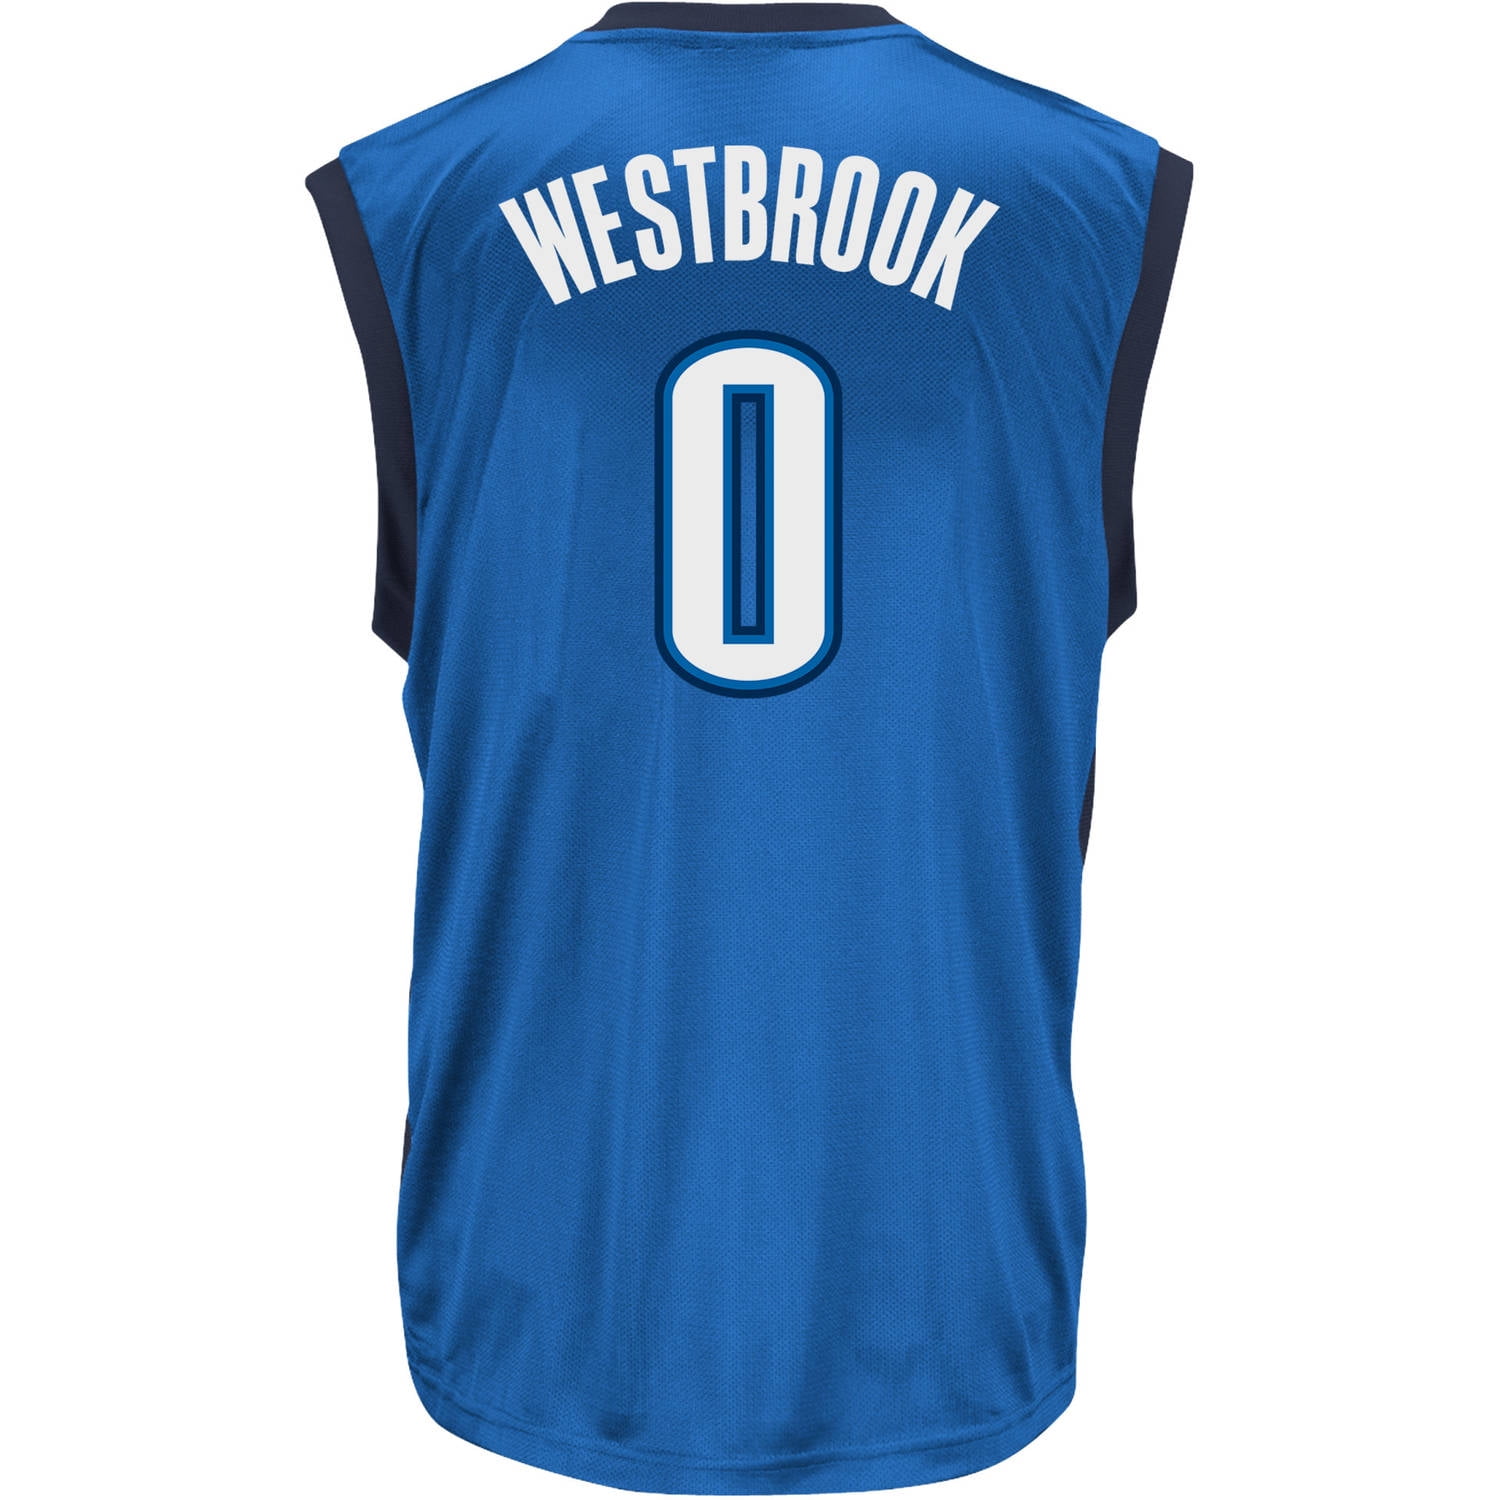 NBA Men's Oklahoma City Thunder Russell Westbrook Replica Player Pride  Jersey, Medium, White : Buy Online at Best Price in KSA - Souq is now  : Sporting Goods